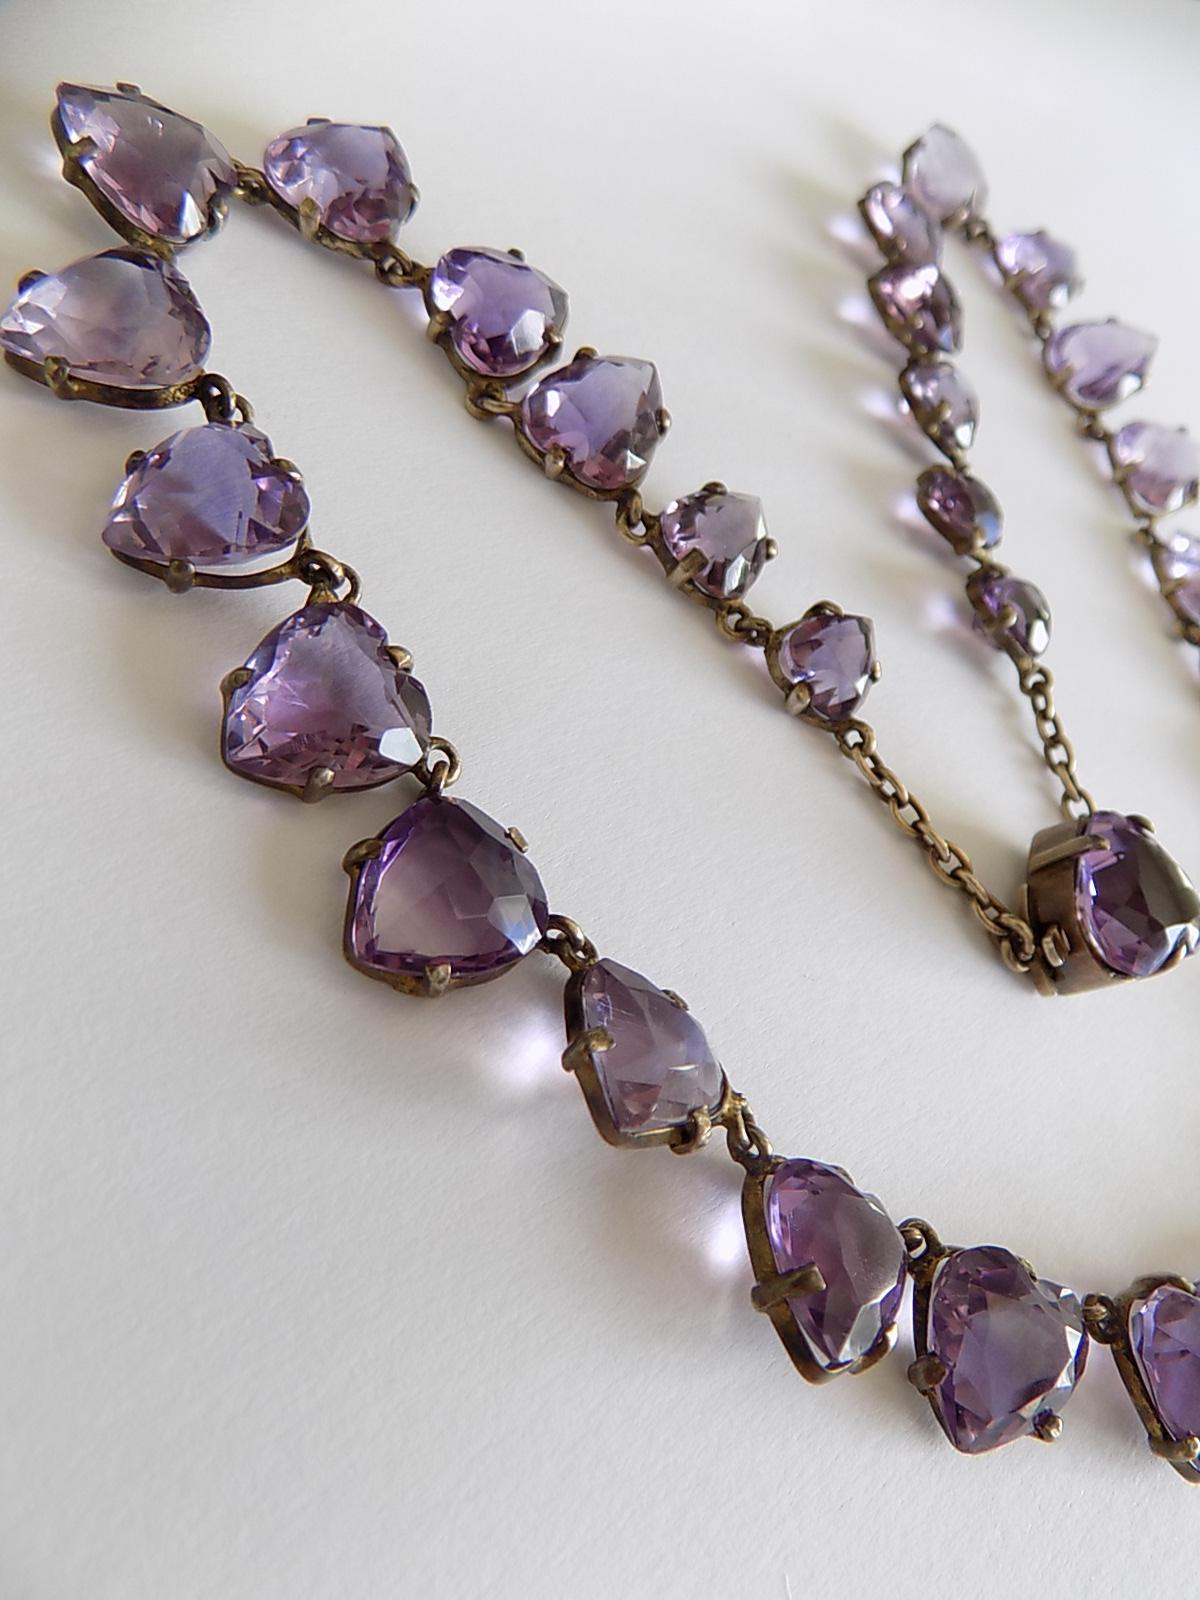 Women's Rare Victorian Silver Gilt and Heart Shaped Amethyst Riviere Necklace